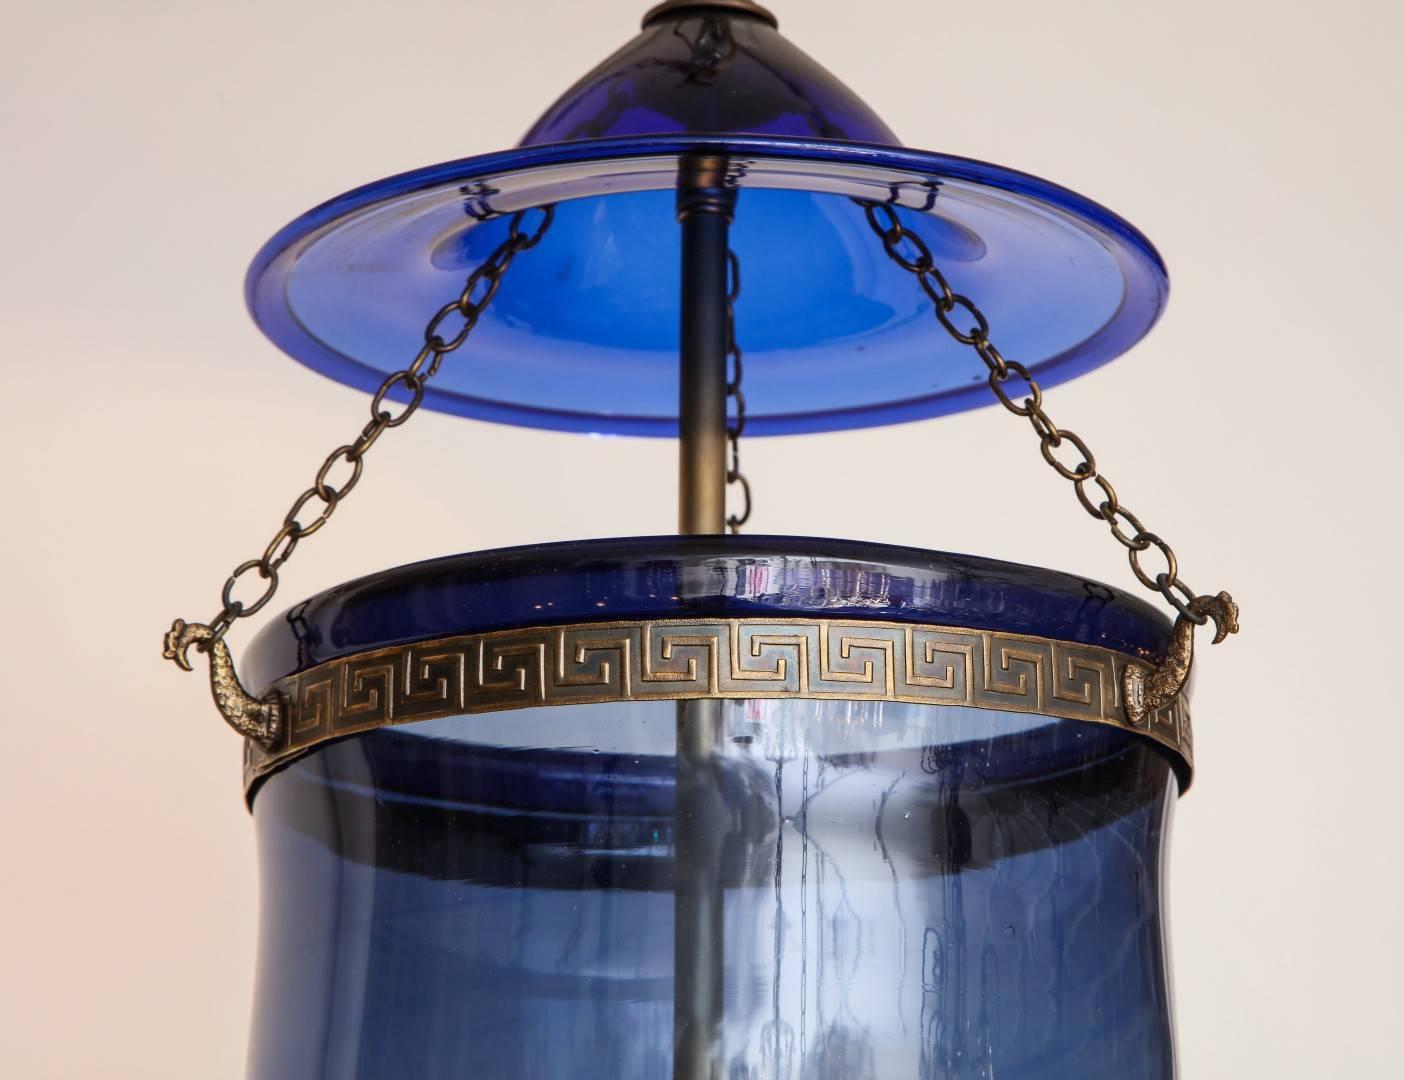 An English cobalt blue hanging glass lantern, suspending a tripartite candelabrum, with etched Greek key motif at collar, original smoke bell and brass fittings, 
New standard wiring 
Includes ceiling canopy and chain with matching antique brass